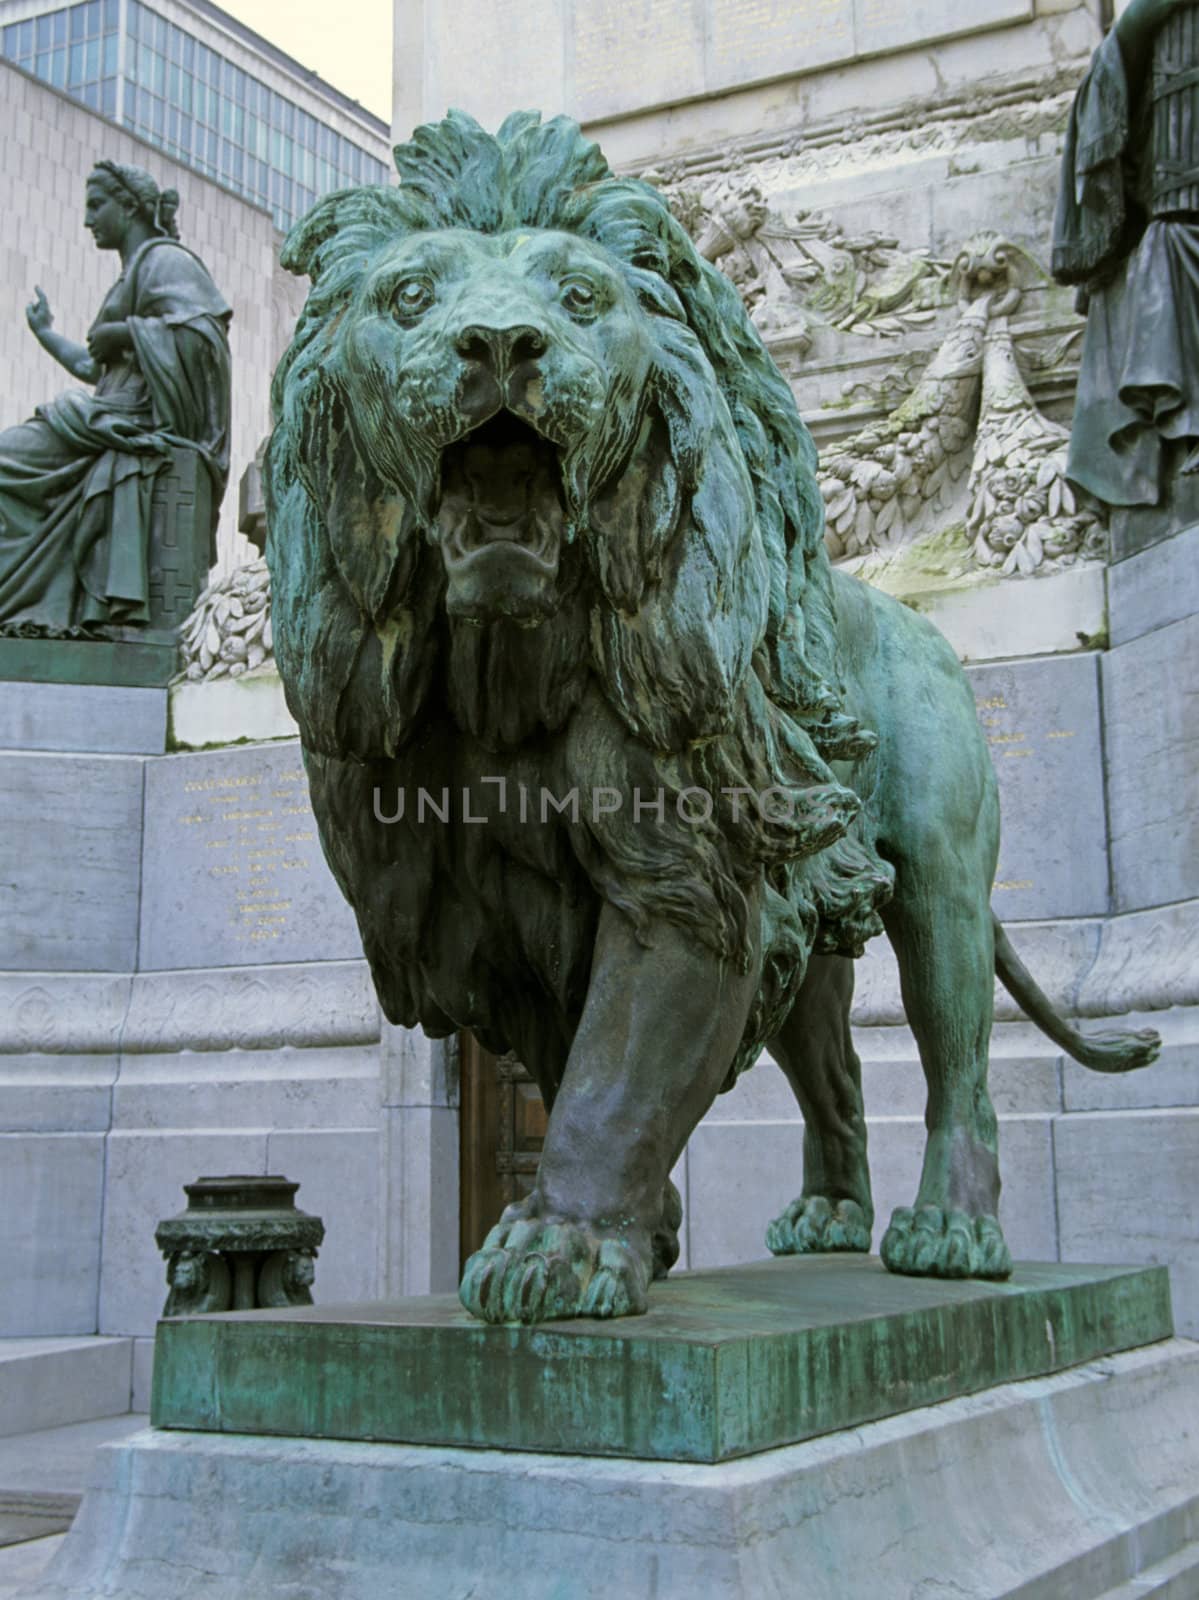 Statue of a roaring lion at the Tomb of the Unknown Soldier in Brussels, Belgium.